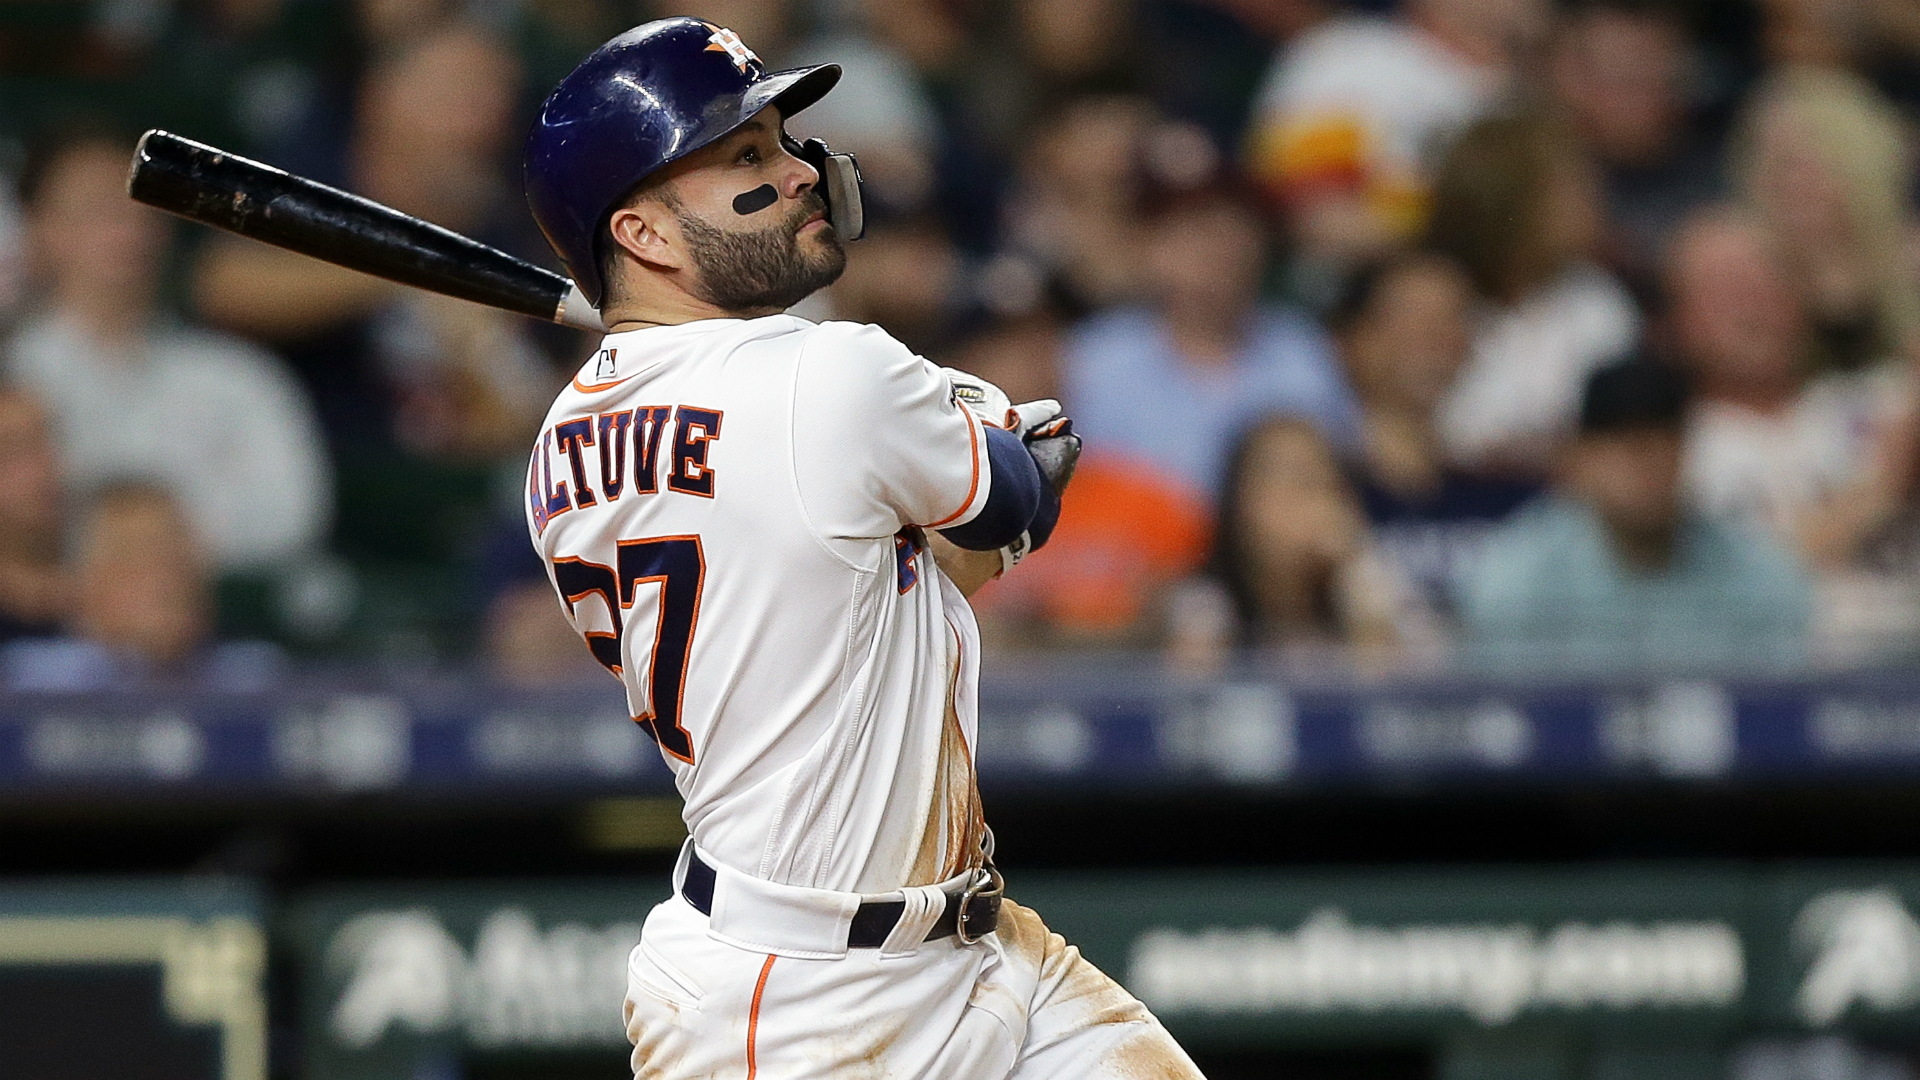 Altuve charges Astros offense in win over Twins